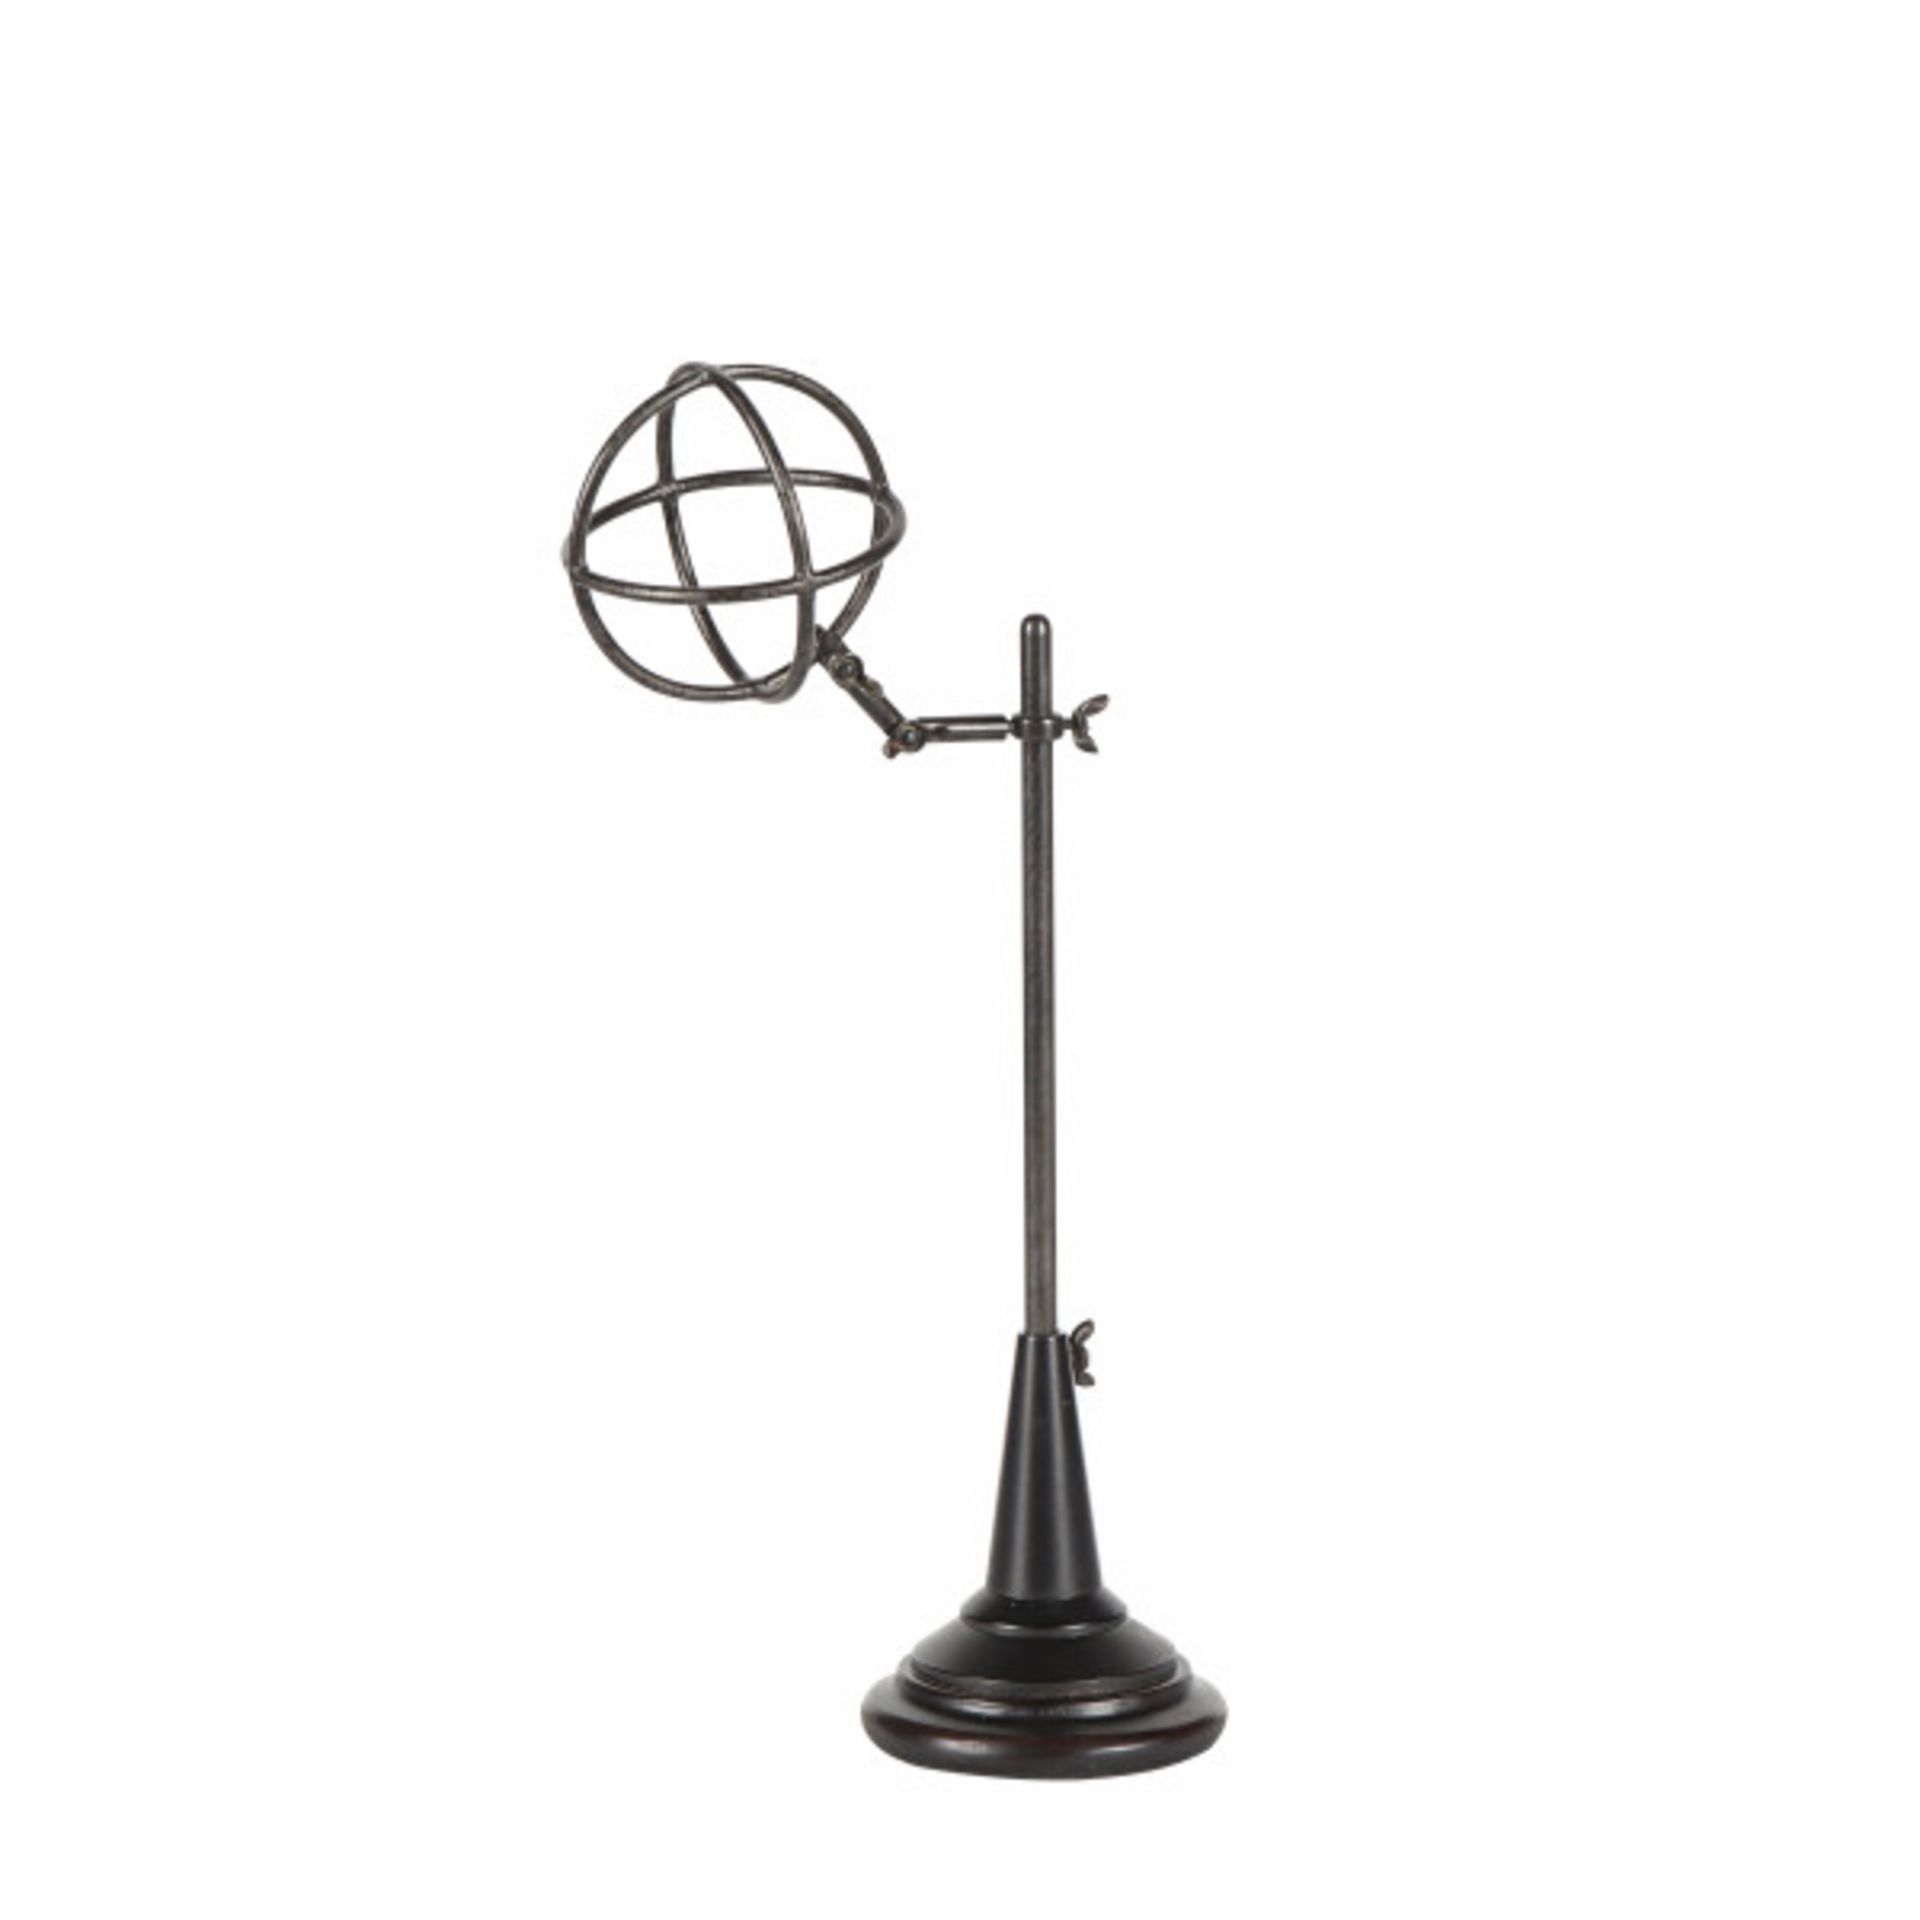 Beauhome Accessories Euclid Sphere 21.4 x 11 x 37.1 CM - - Beauhome’s furnishings and accessories